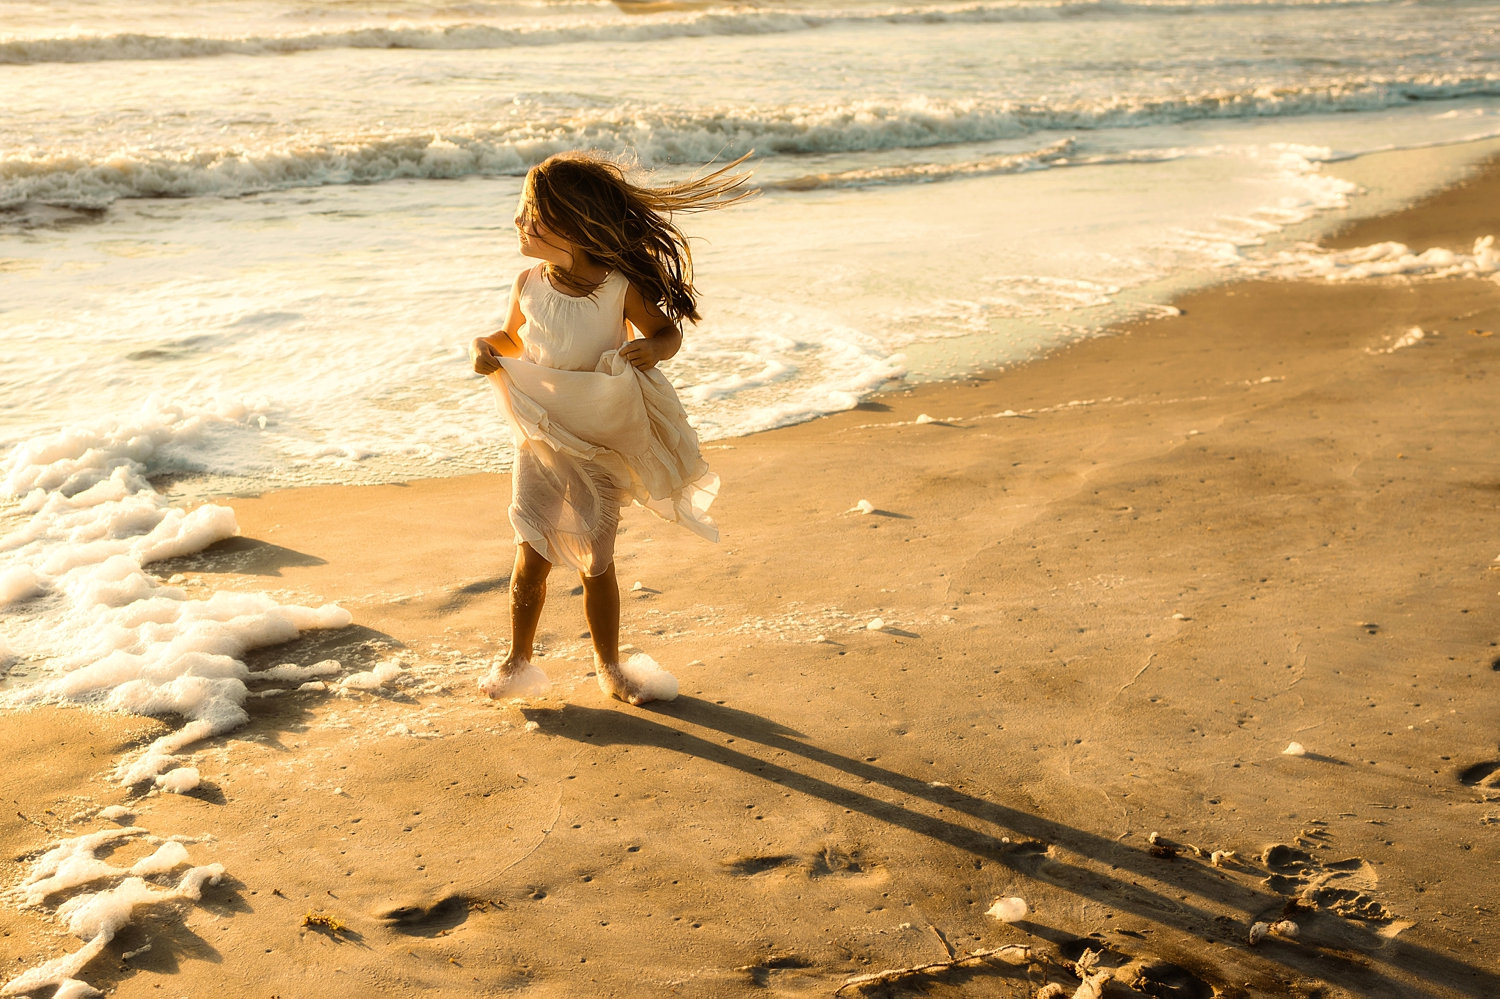 little girl turning her face to the sun, little girl with her hair blowing in the wind, Florida, Ryaphotos